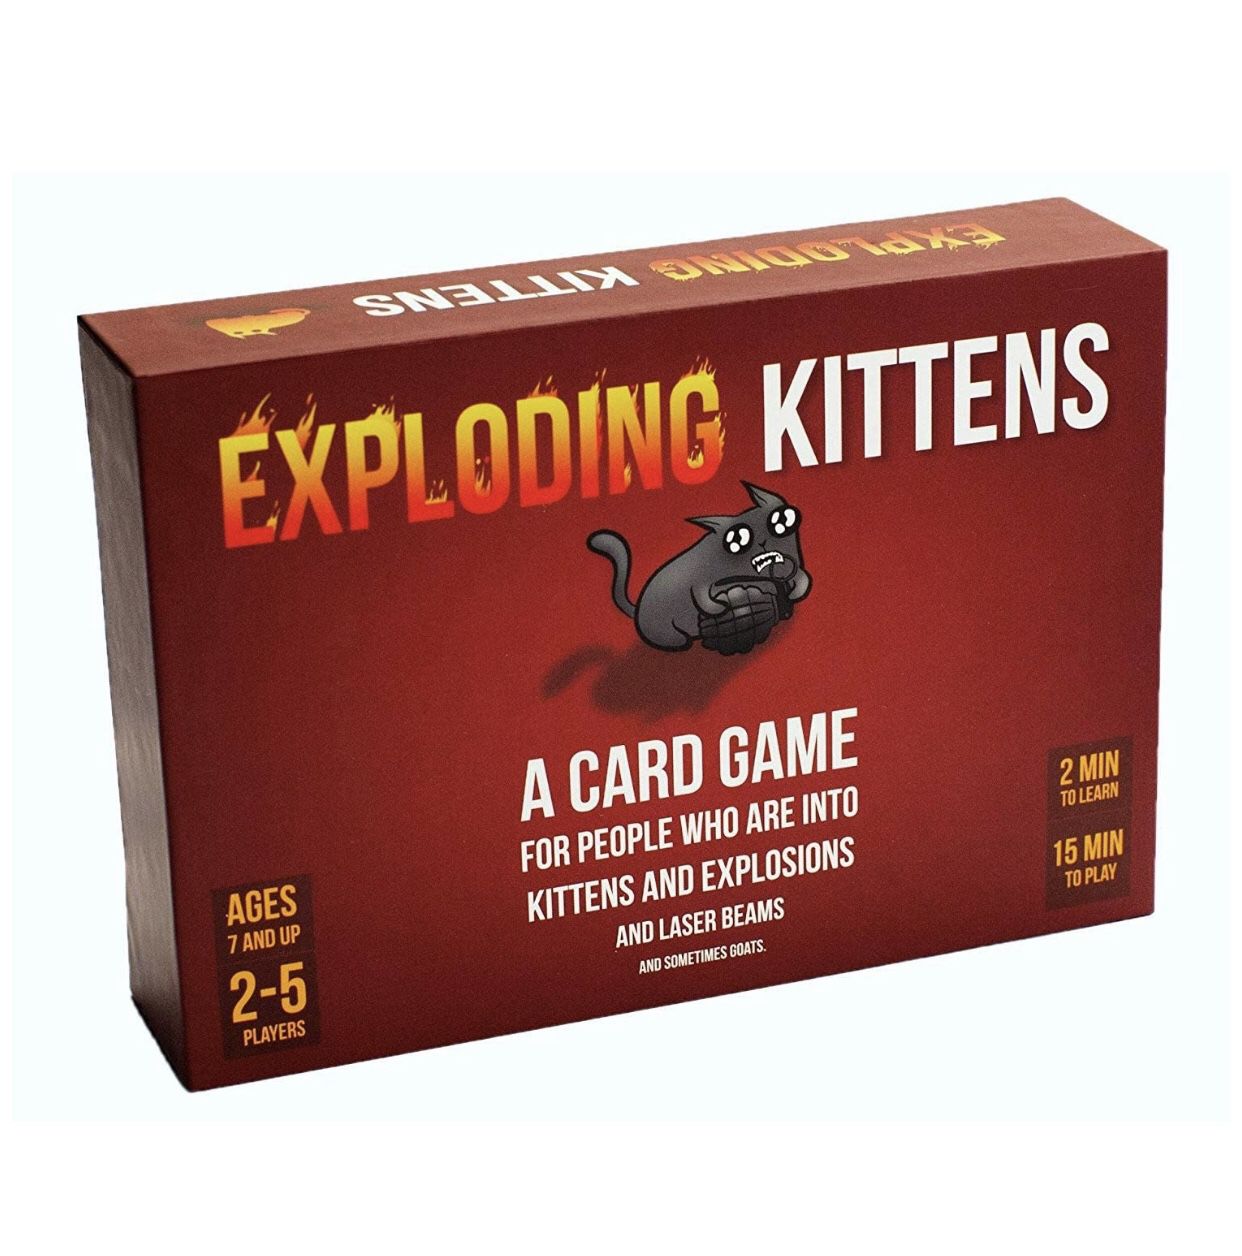 EXPLODING KITTENS Card Game, Card Games for Adults, Teens and Kids,Brand New